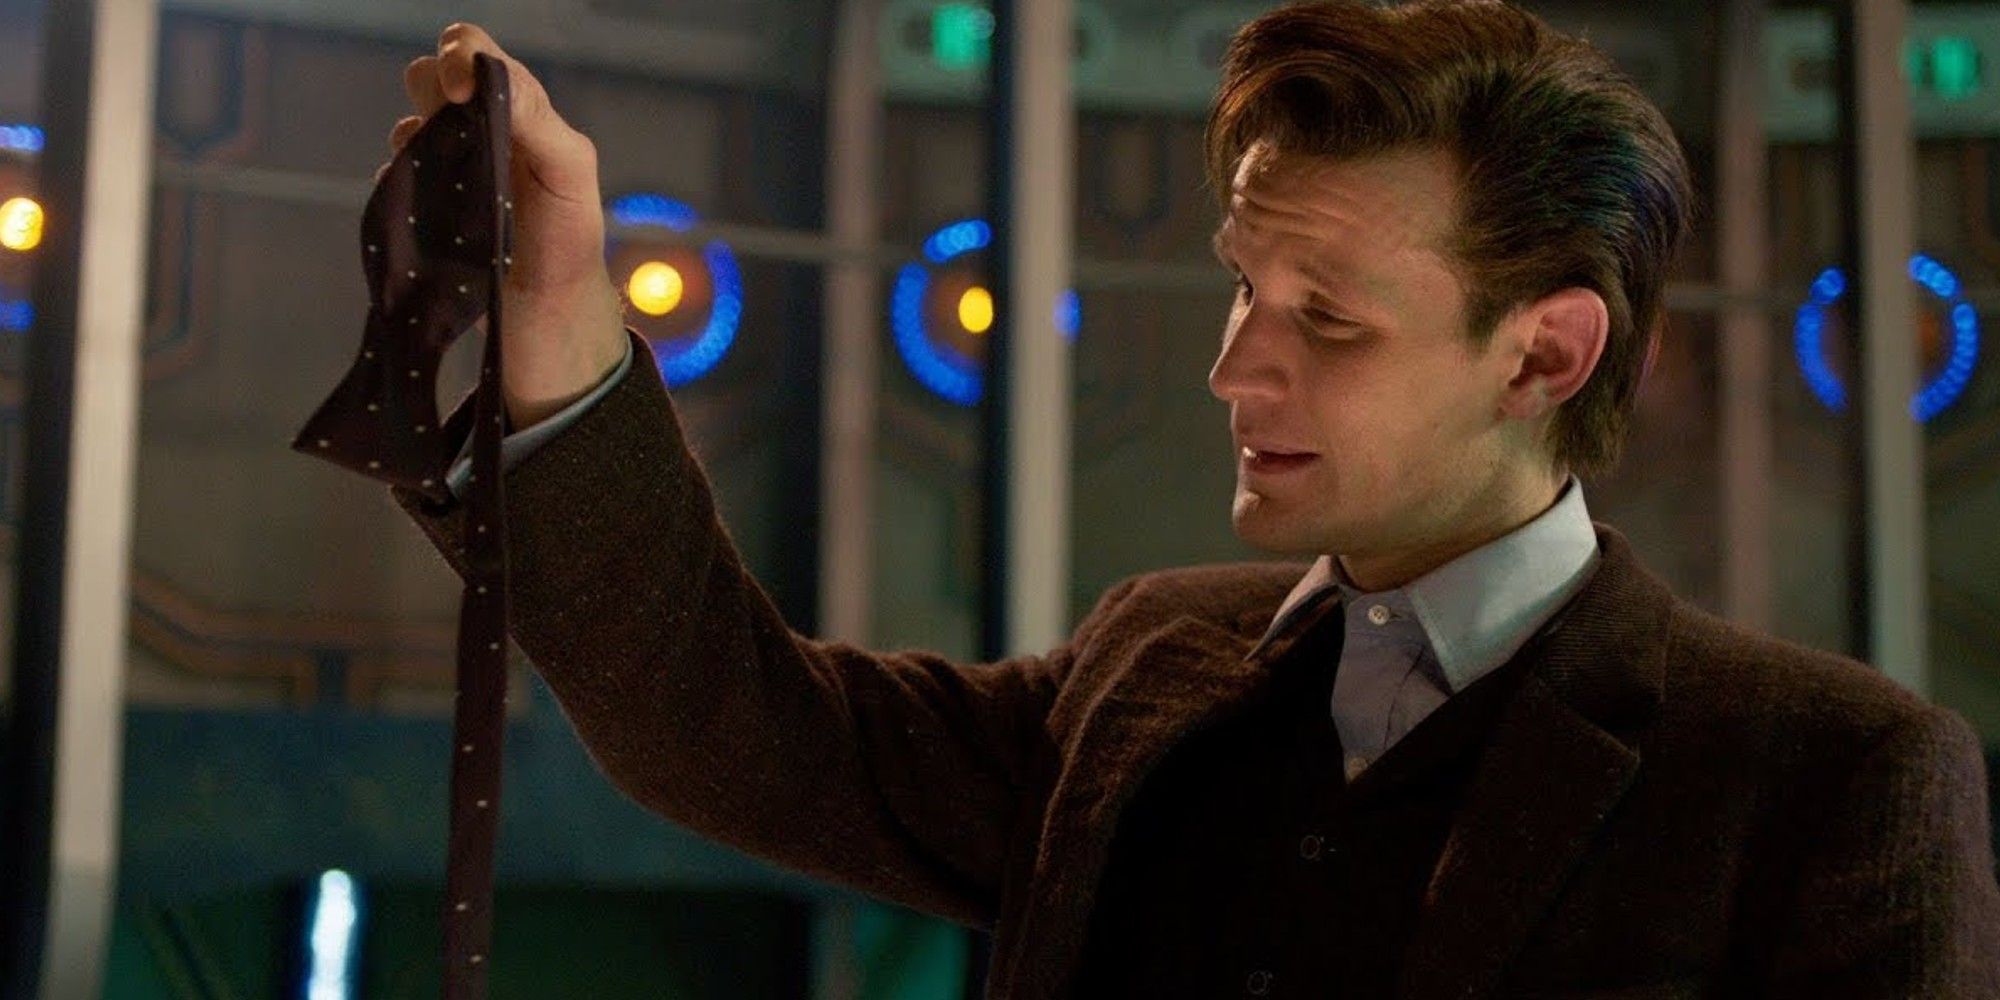 Doctor Who Matt Smith as the Eleventh Doctor The Time of the Doctor